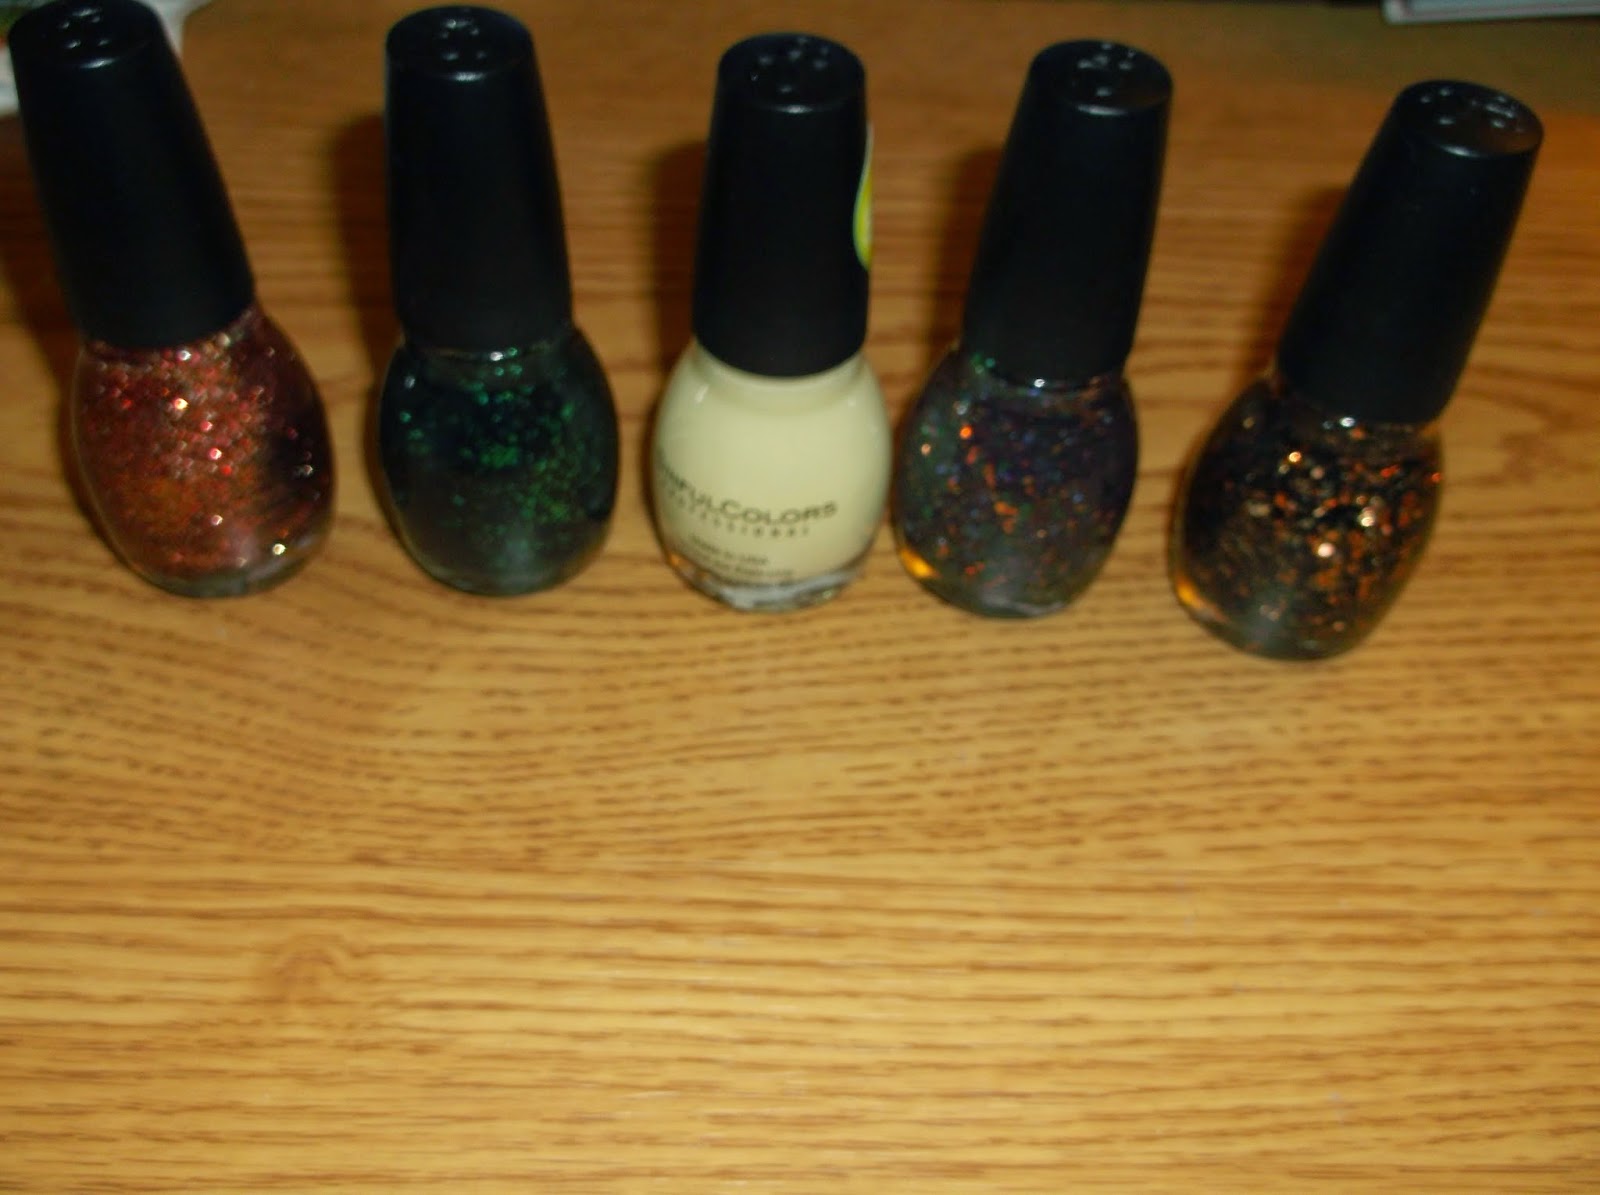 9. Sinful Colors Halloween Nail Polish Collection - wide 6